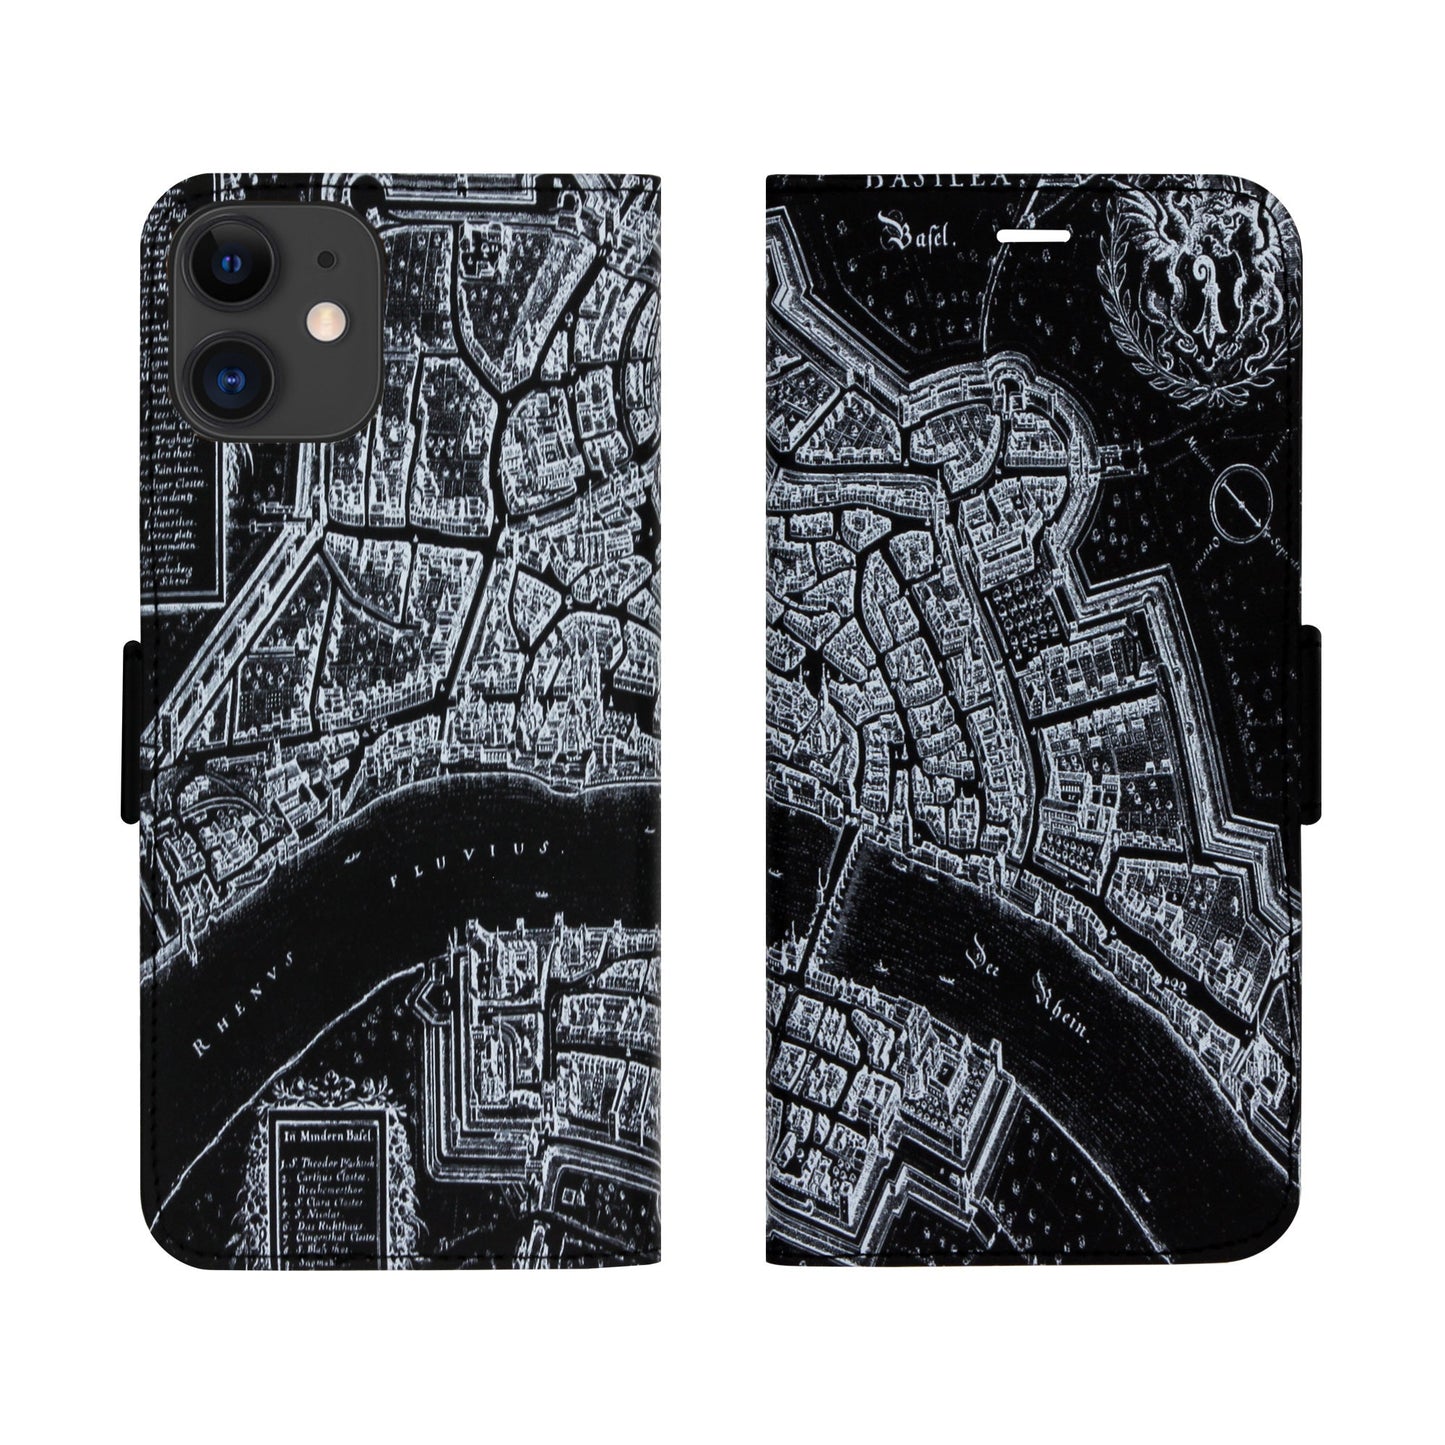 Basel Merian Negative Victor Case for iPhone, Samsung and Huawei